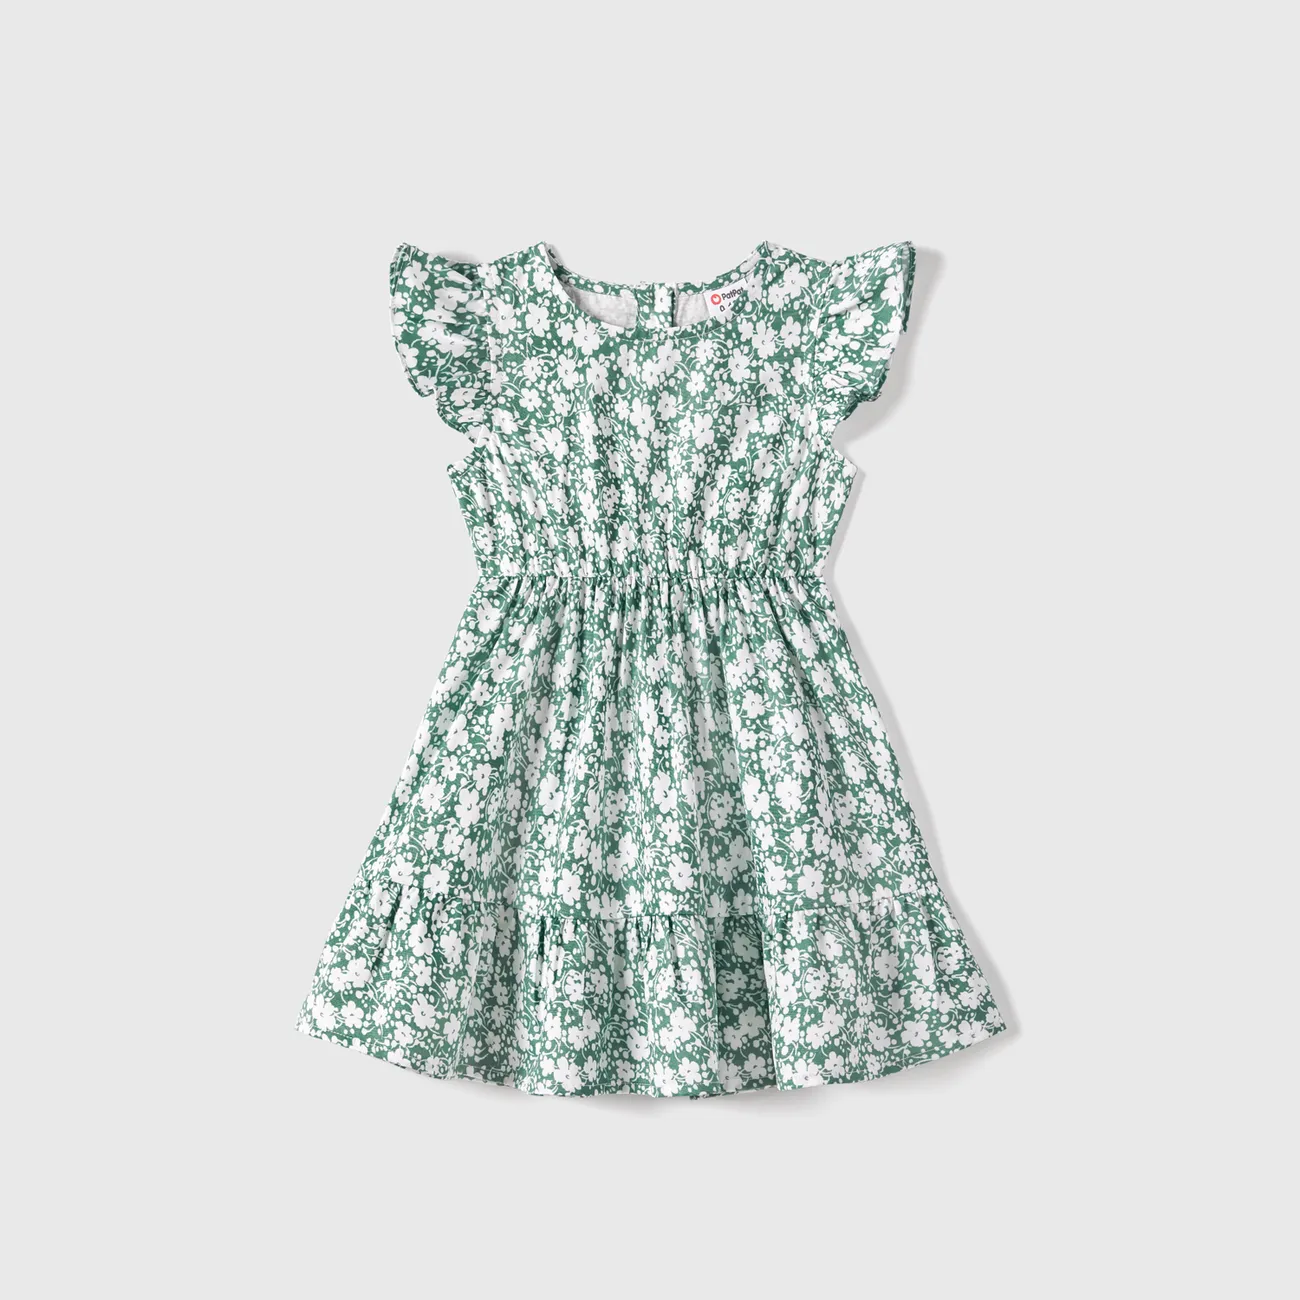 Family Matching Allover Floral Print Short-sleeve Dresses and Color Block Tops Sets Green/White big image 1